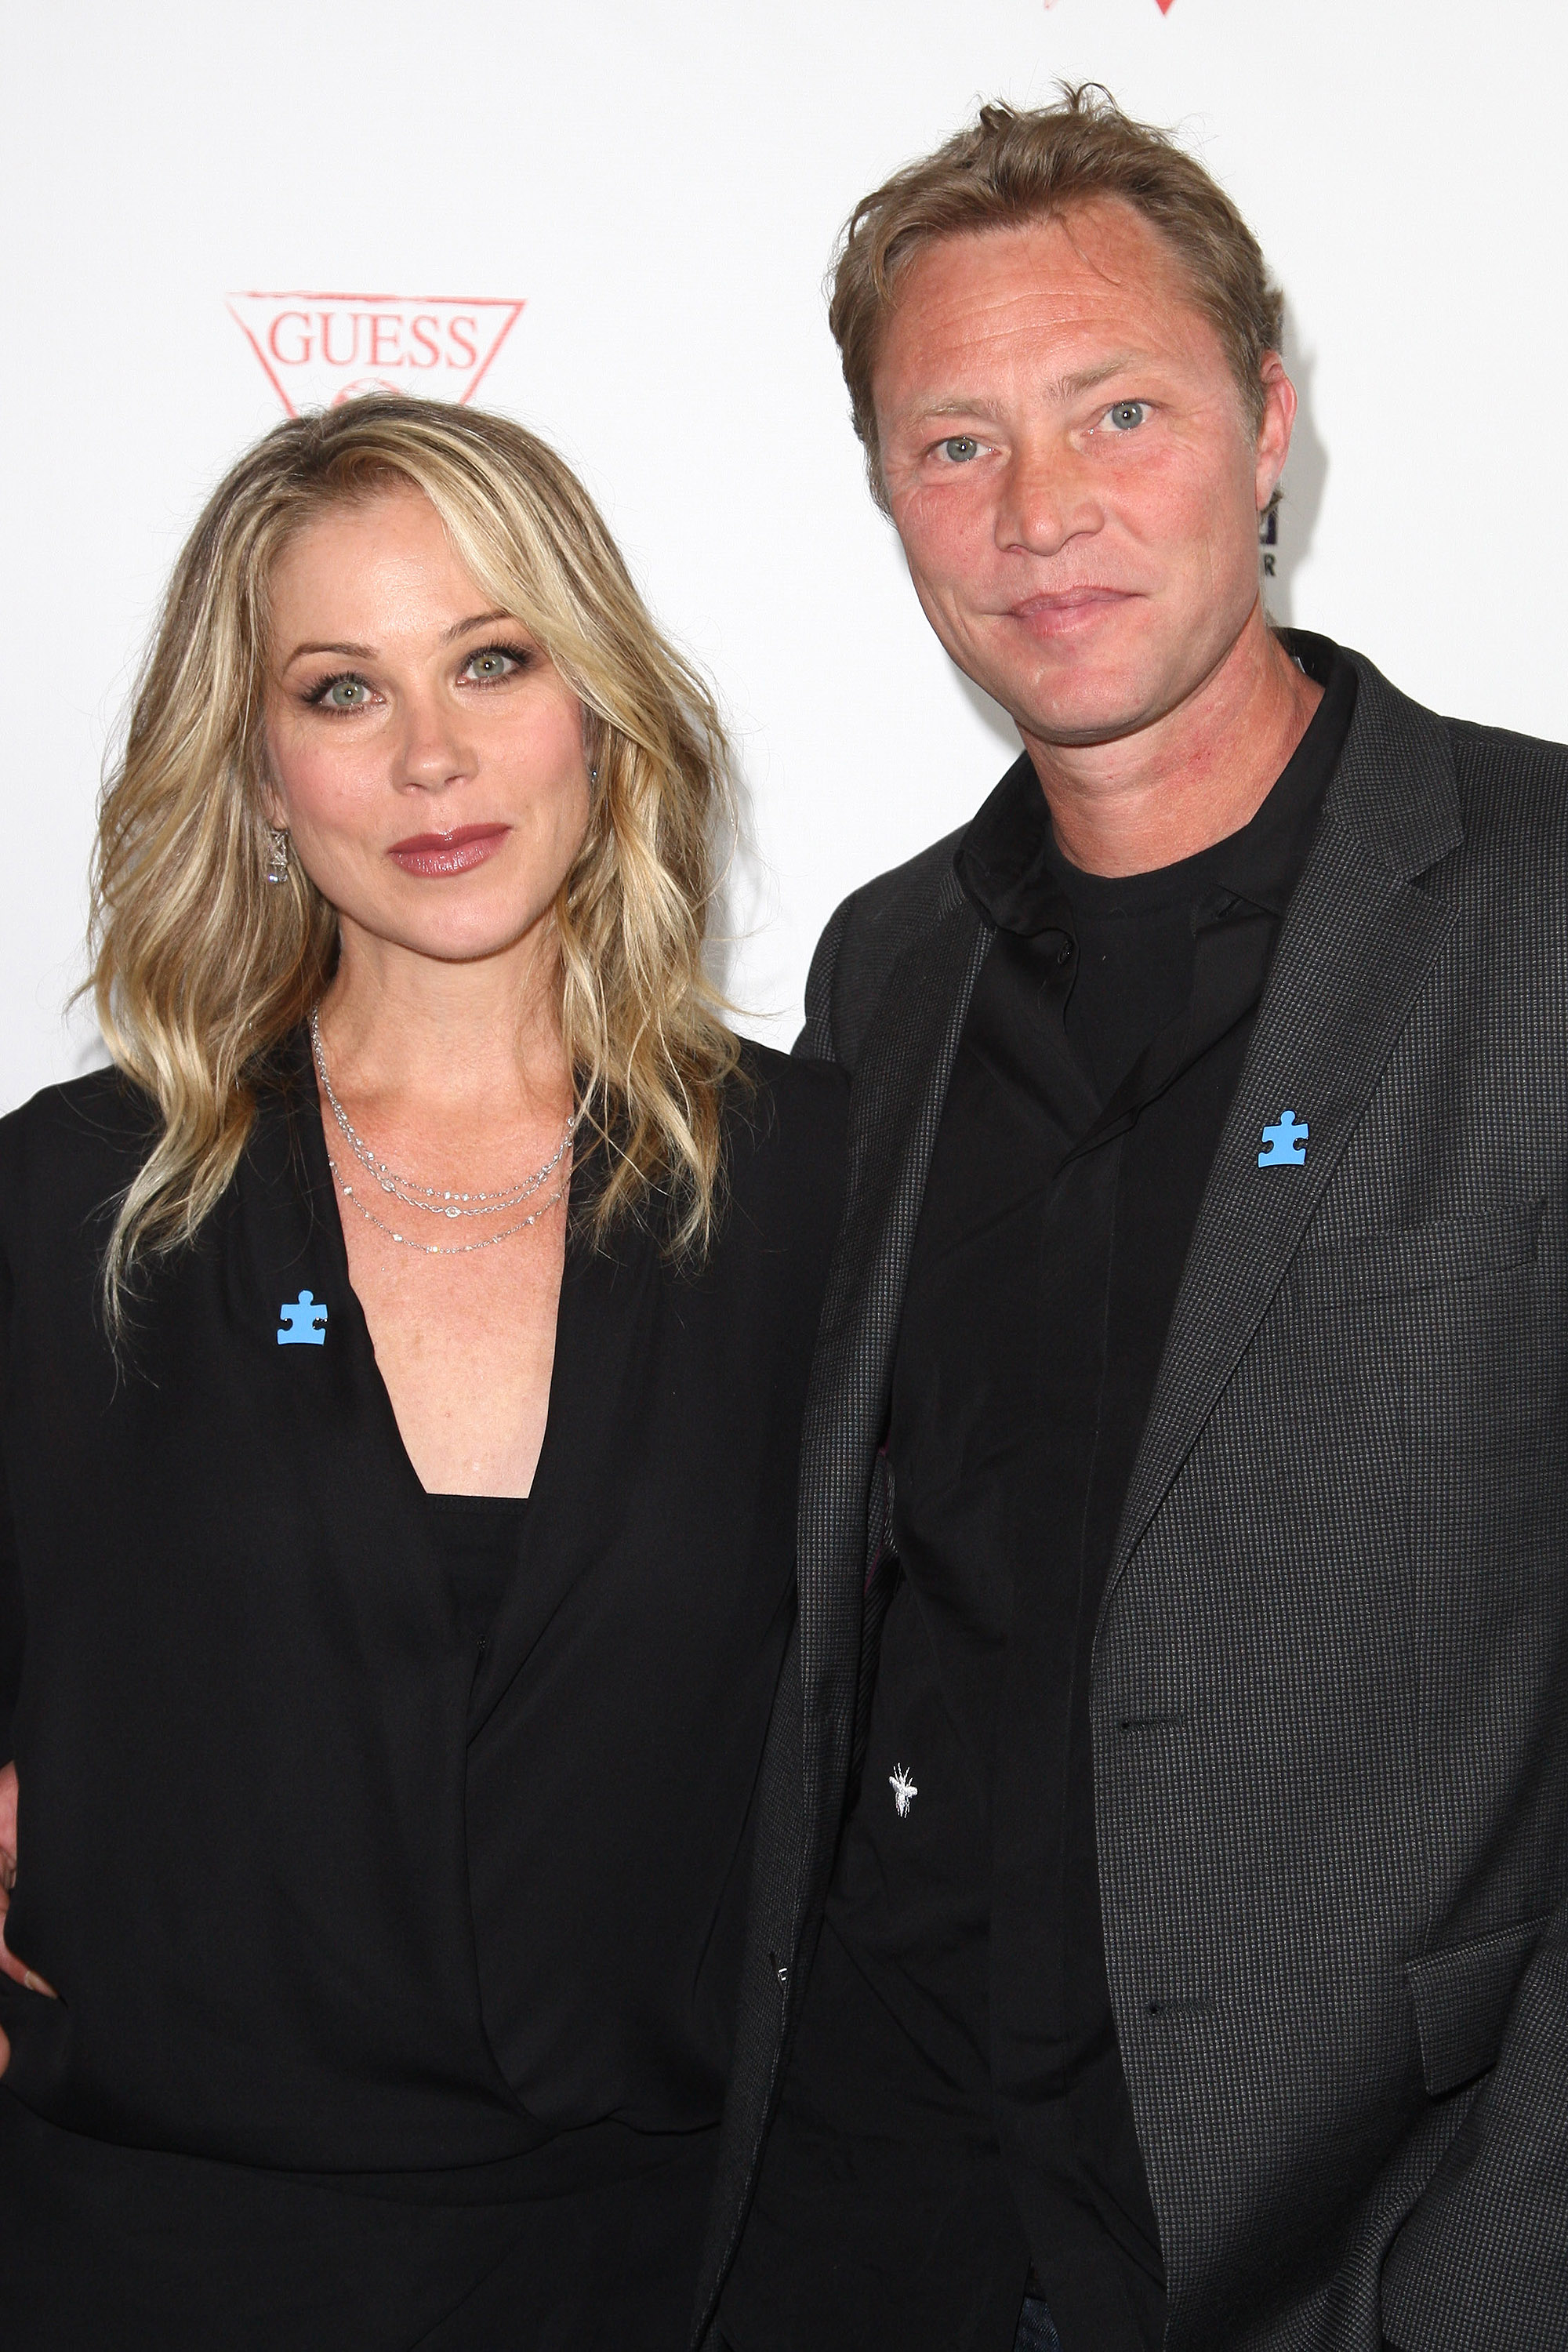 Christina Applegate and Martyn LeNoble attend the 3rd Light Up The Blues Concert to benefit Autism Speaks held at the Pantages Theatre in Hollywood, California, on April 25, 2015. | Source: Getty Images